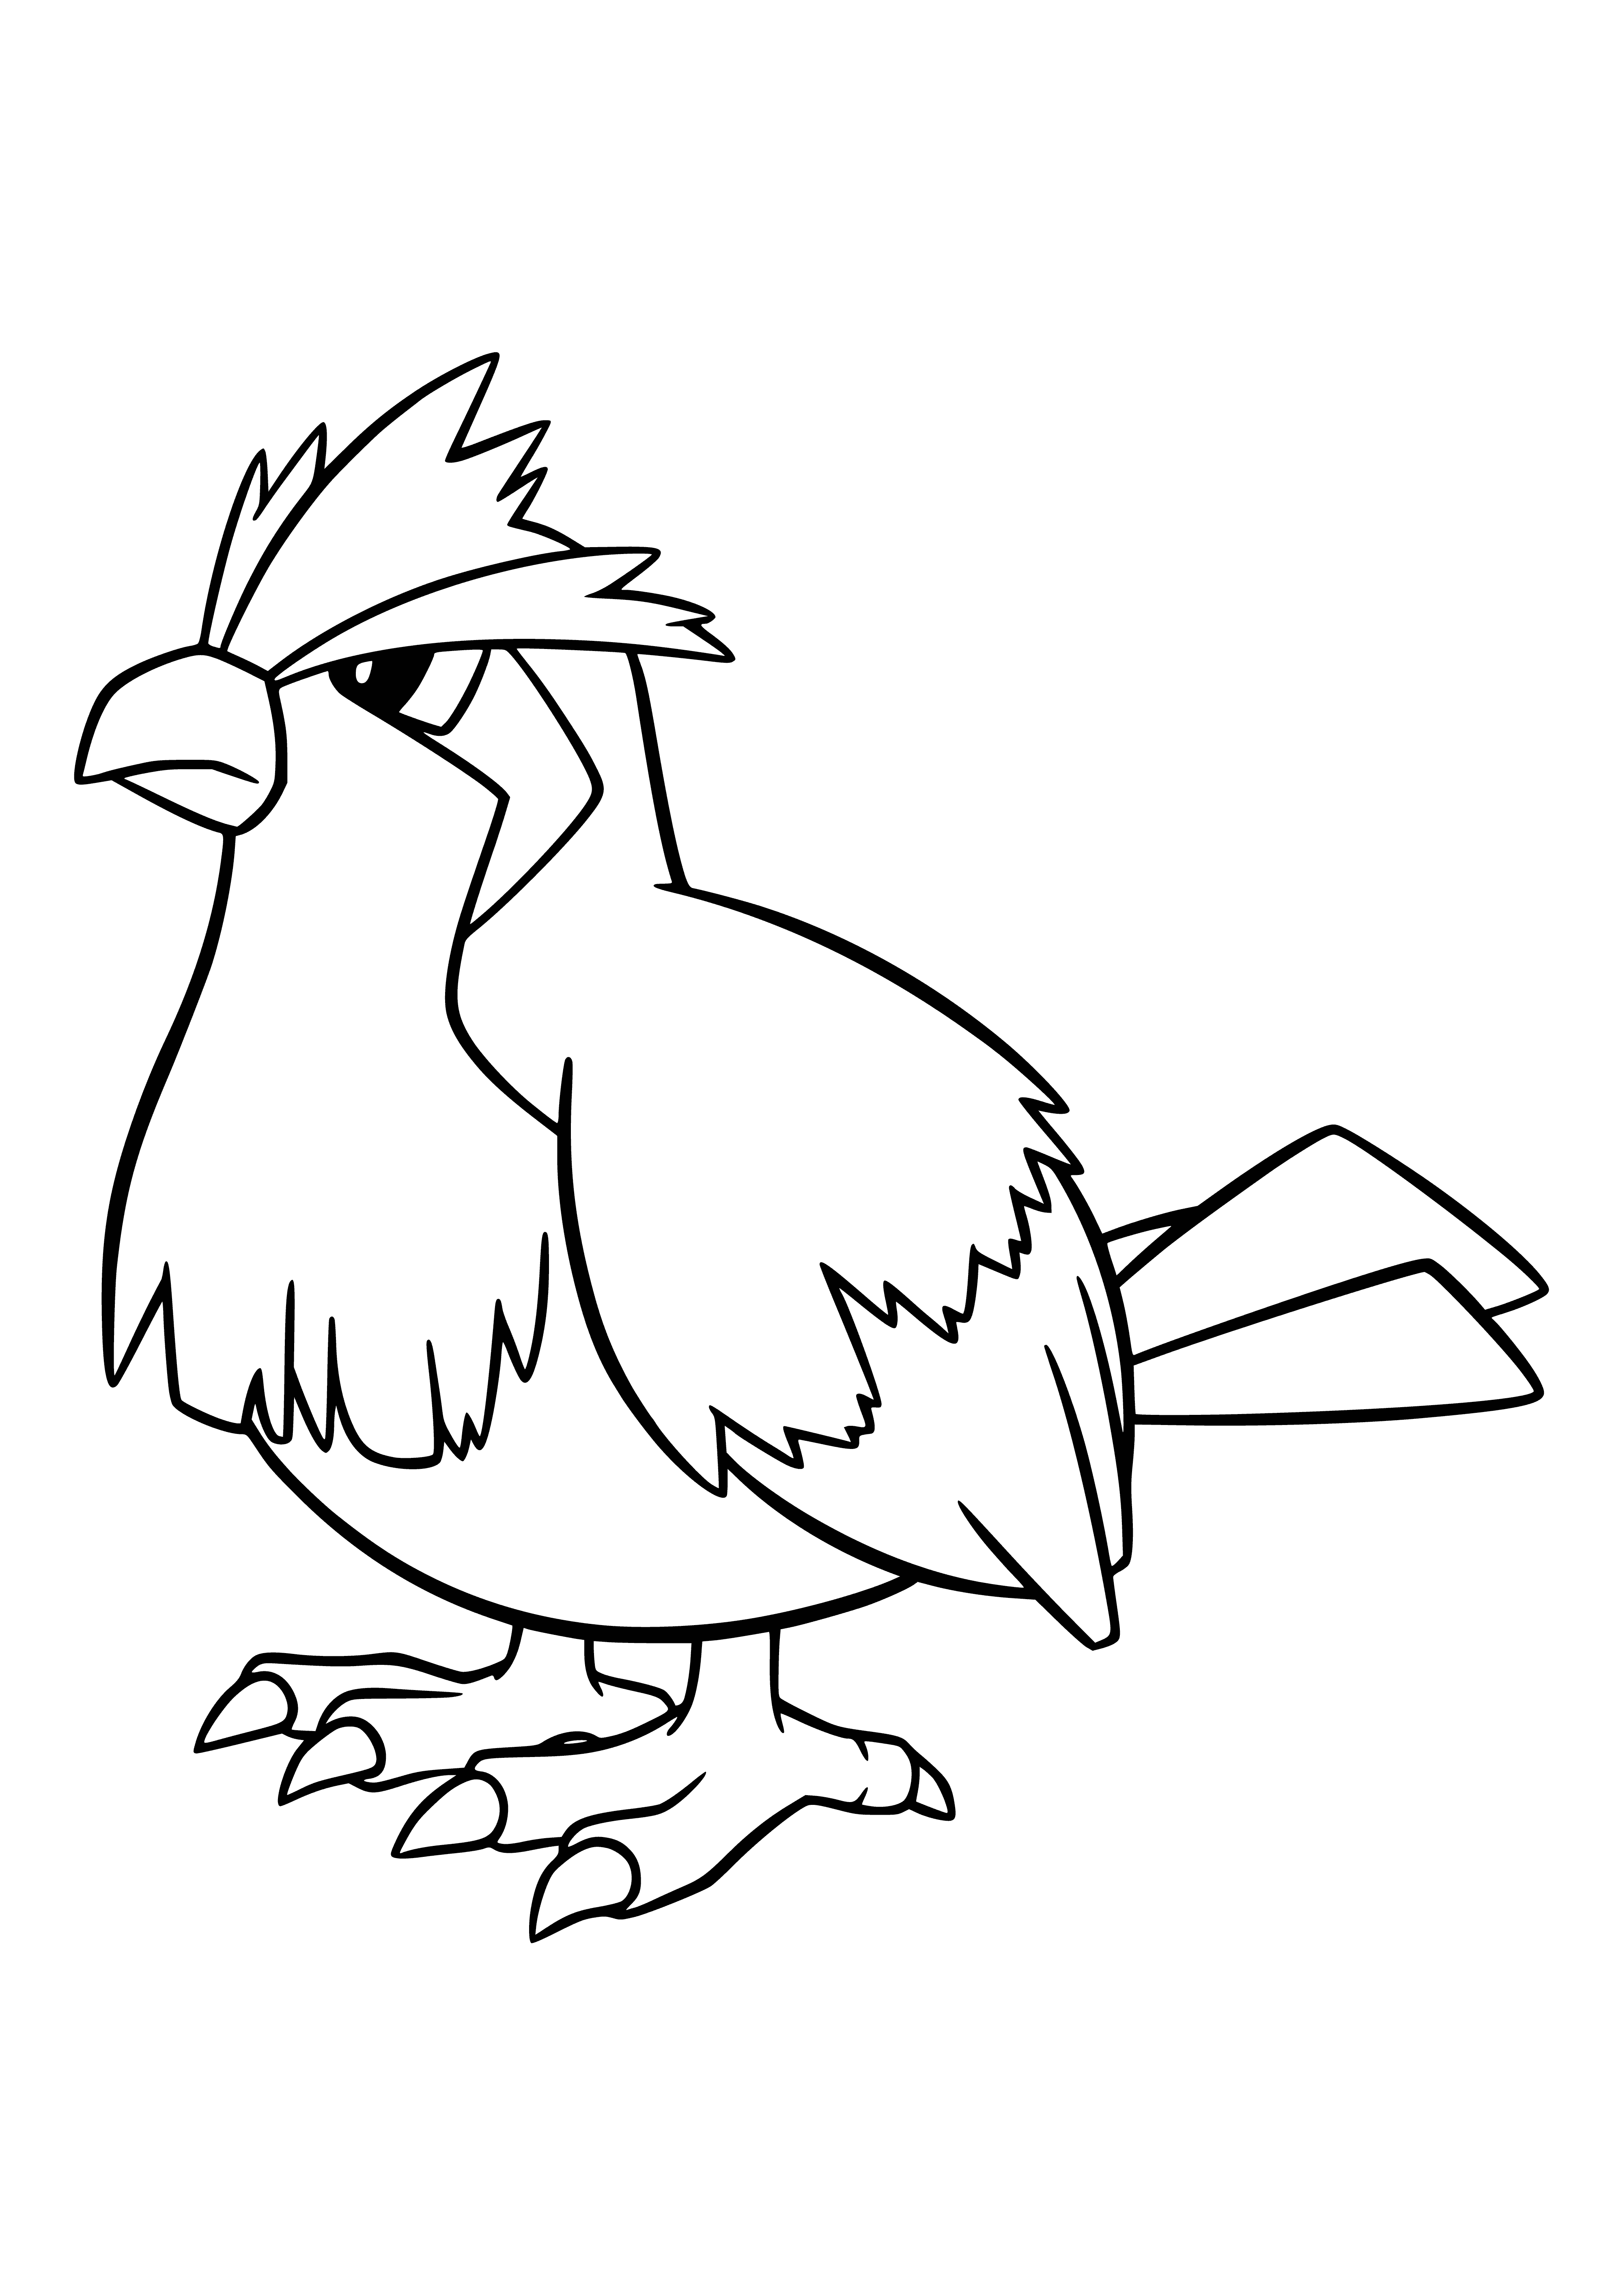 coloring page: Pidgey is a small brown and white bird Pokemon with a beak, black eyes & two stripes on its back. Its tail has a white tip. #Pokemon